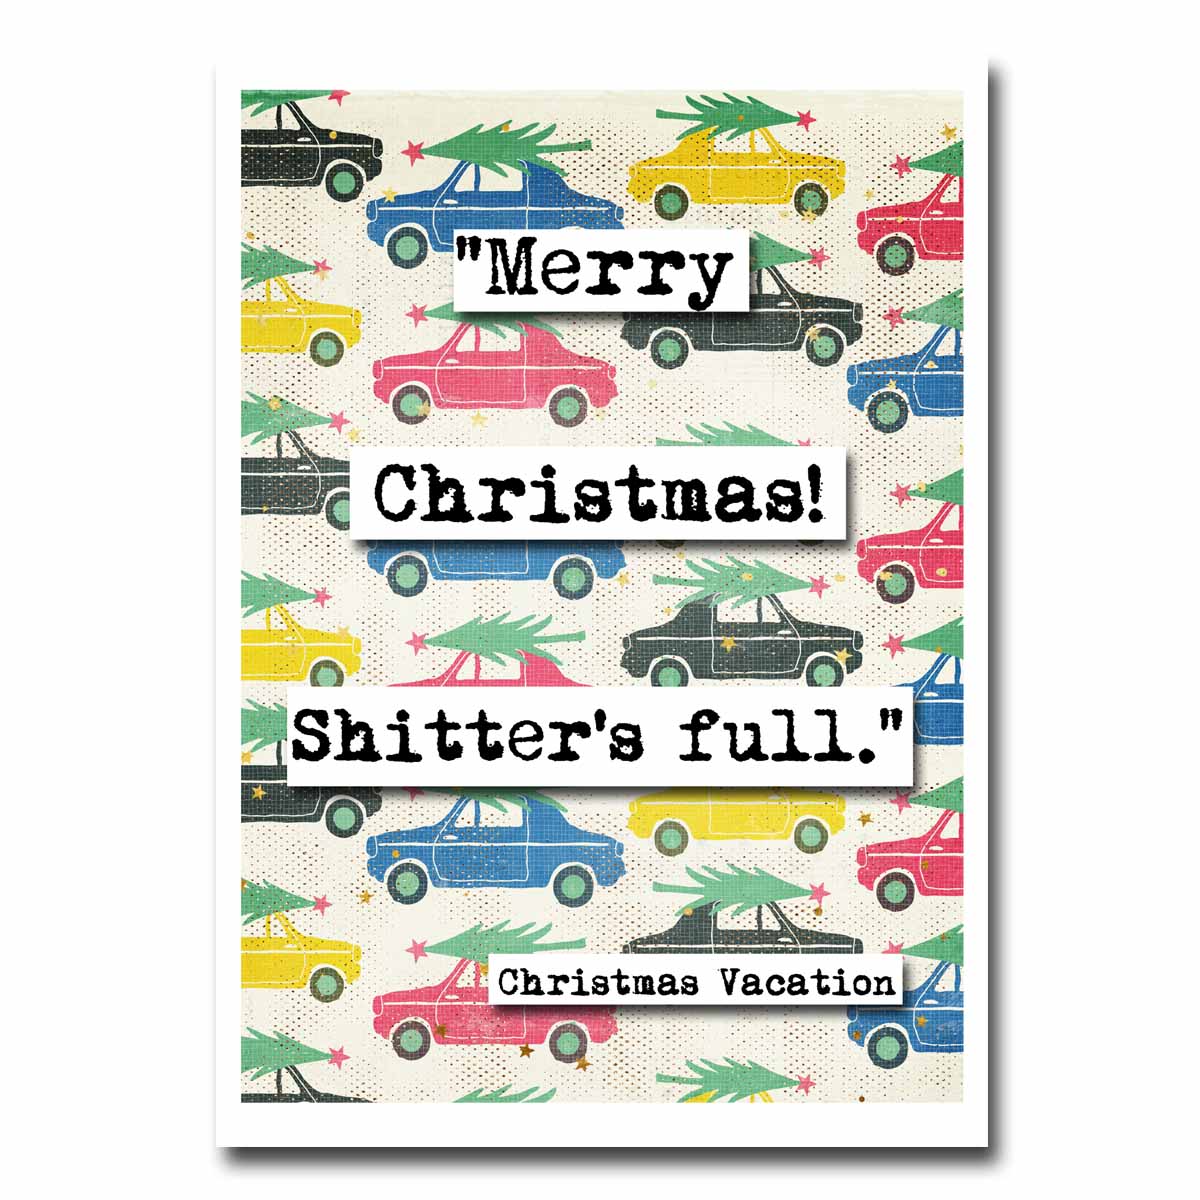 Christmas Vacation Shitter's Full Quote Blank Christmas Greeting Card (38c)